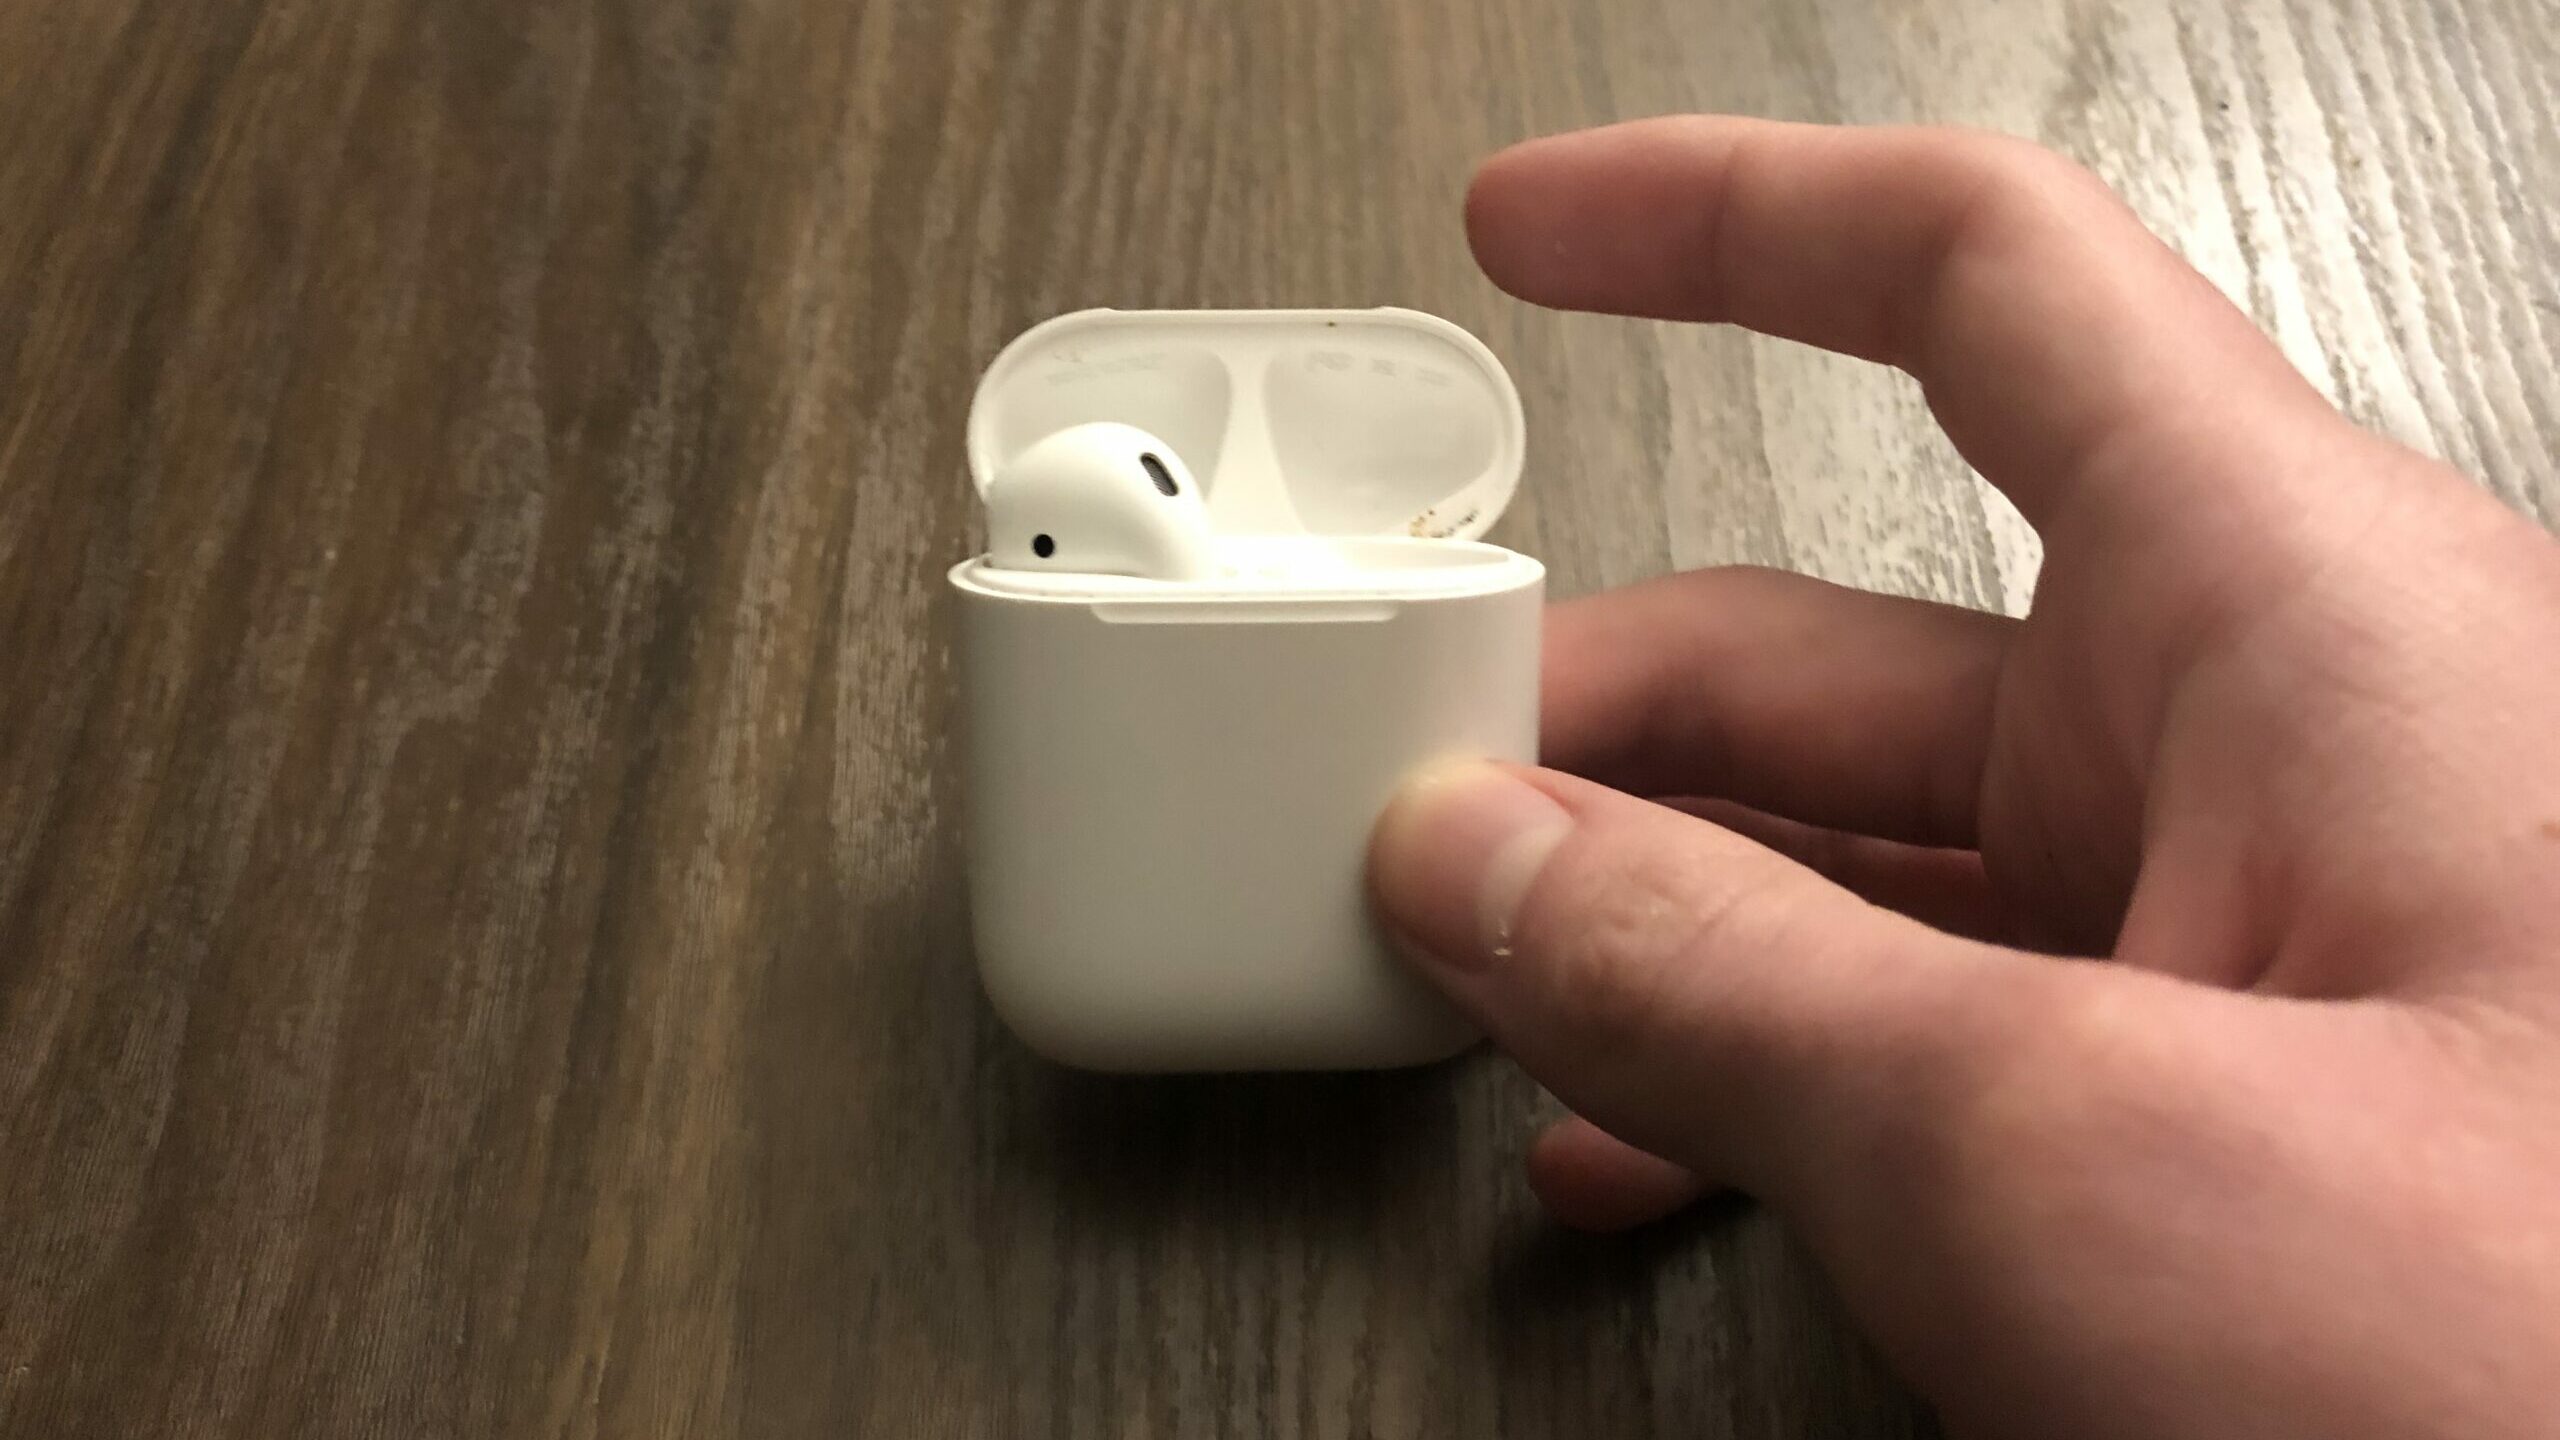 One AirPod Charging Case